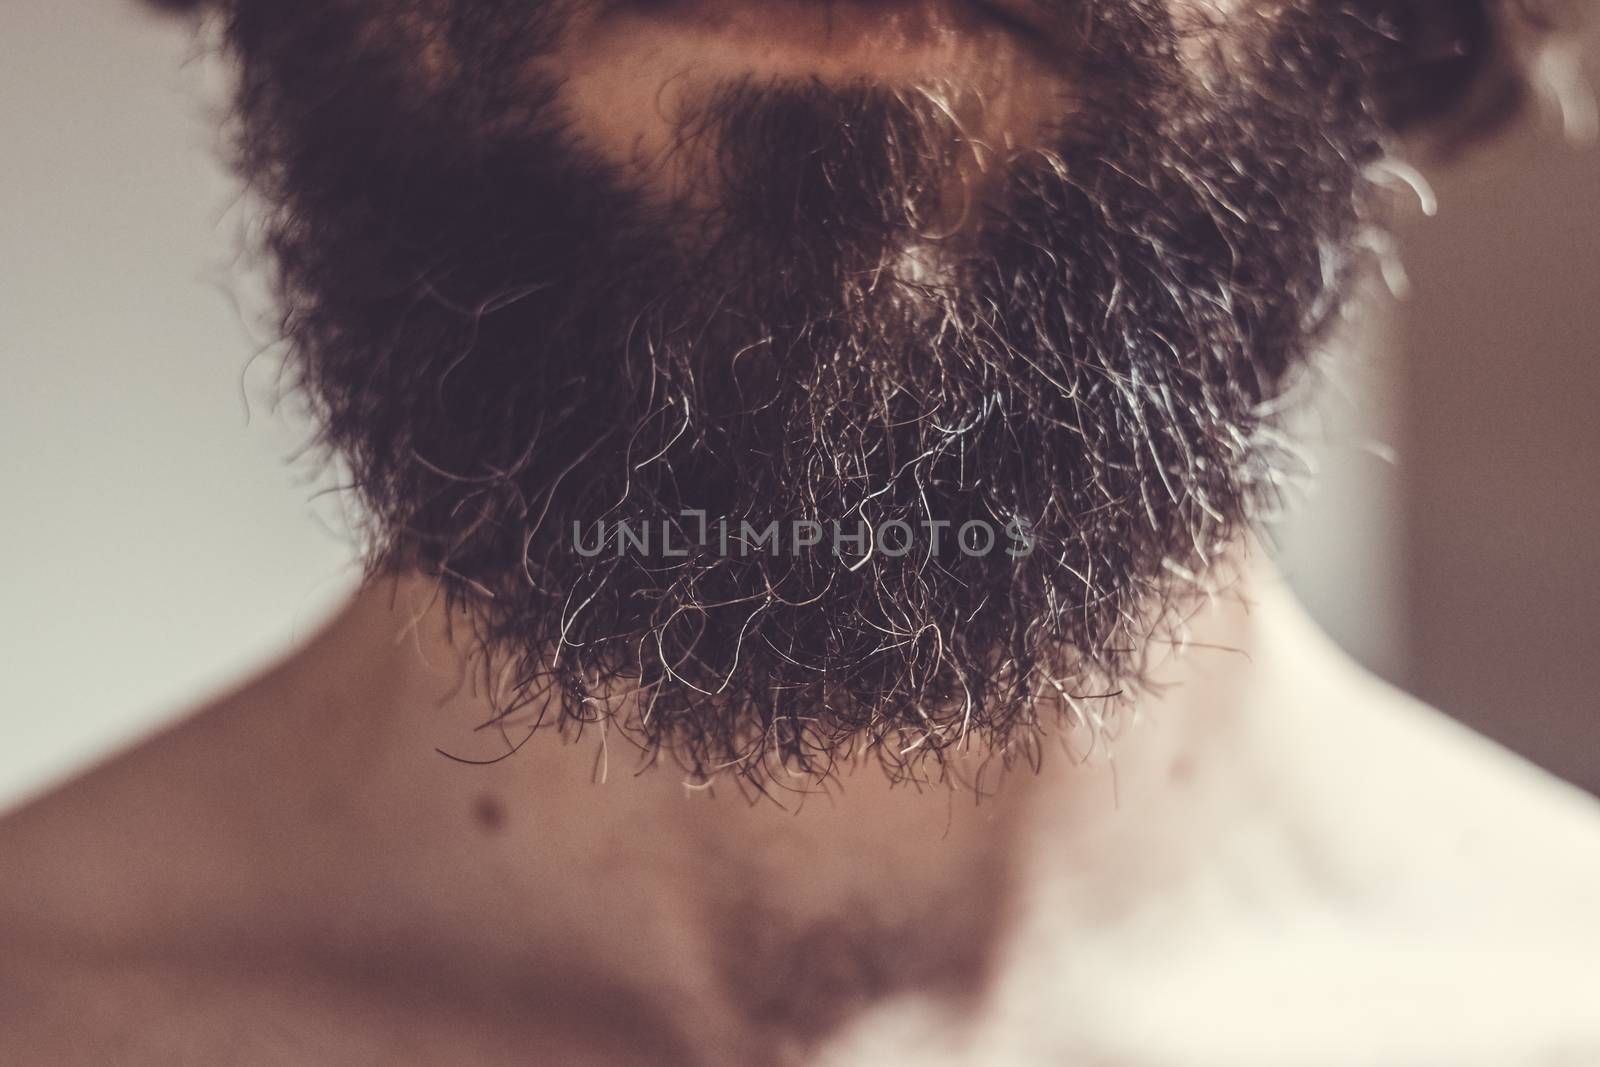 37 years old caucasian male beard, neck and part of the torso by mikelju